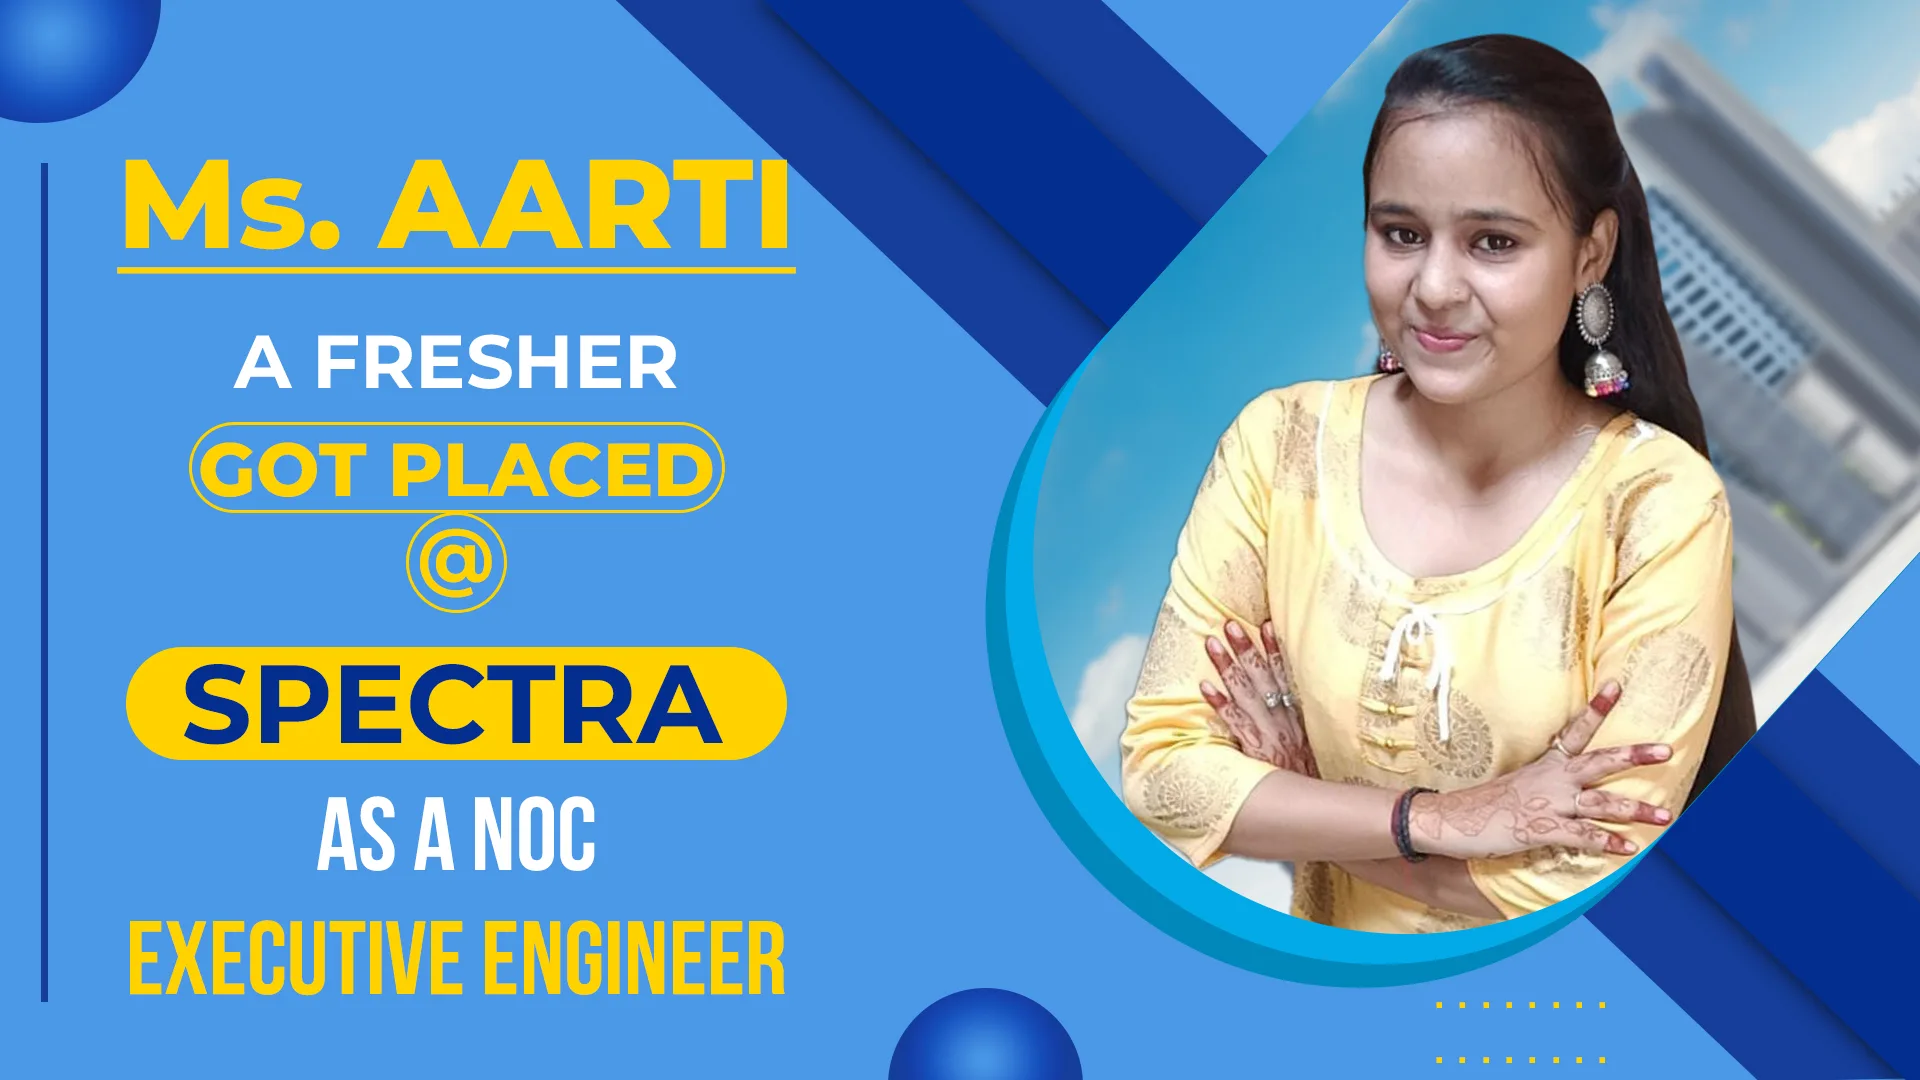 Ms. Aarti, a fresher, got placed at Spectra as a NOC Executive Engineer